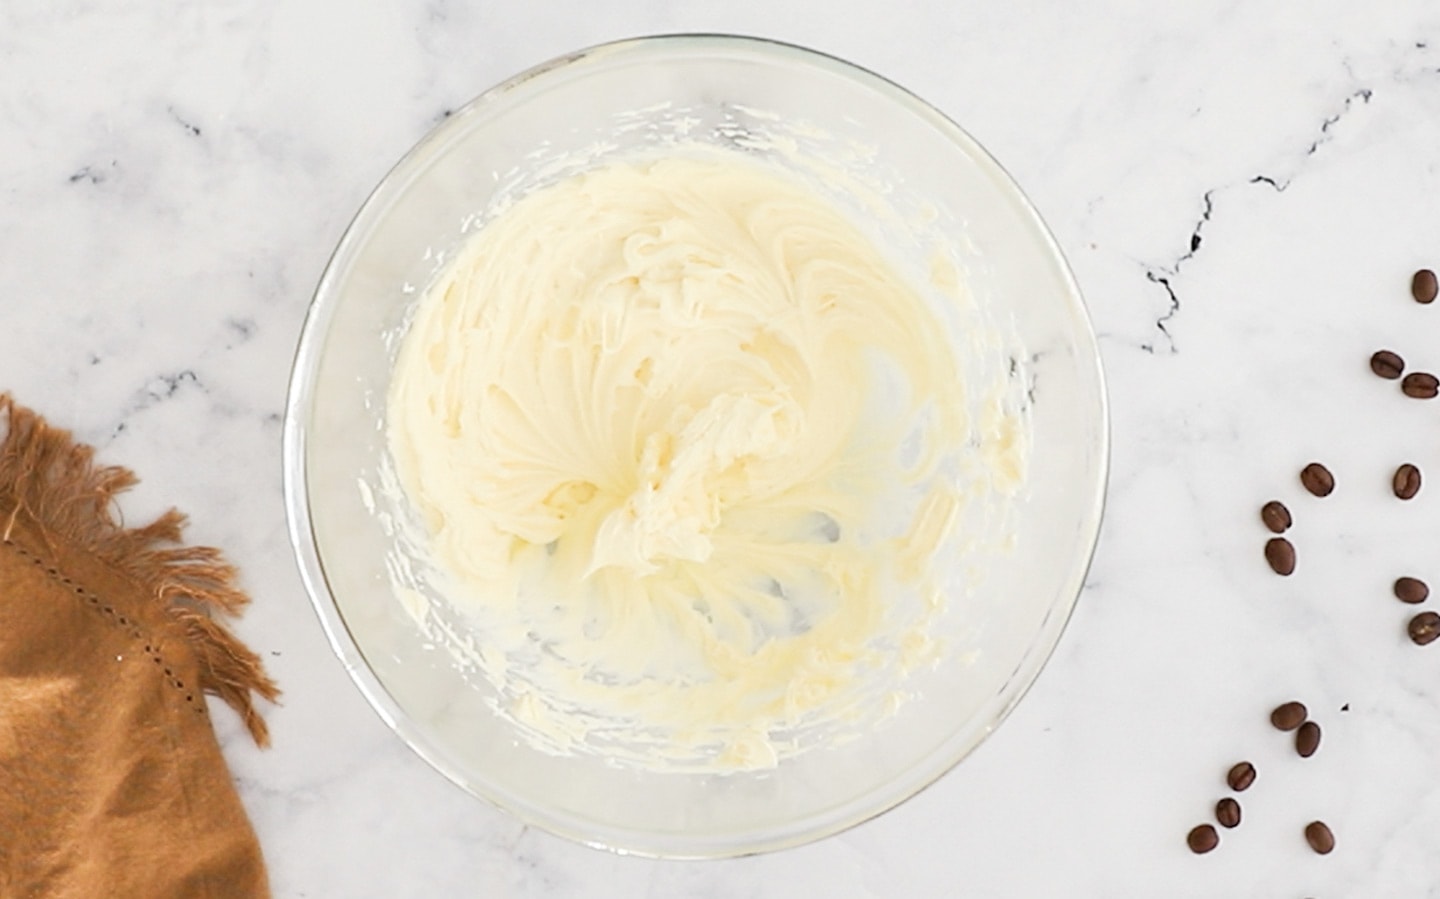 Whipped mascarpone in a bowl.